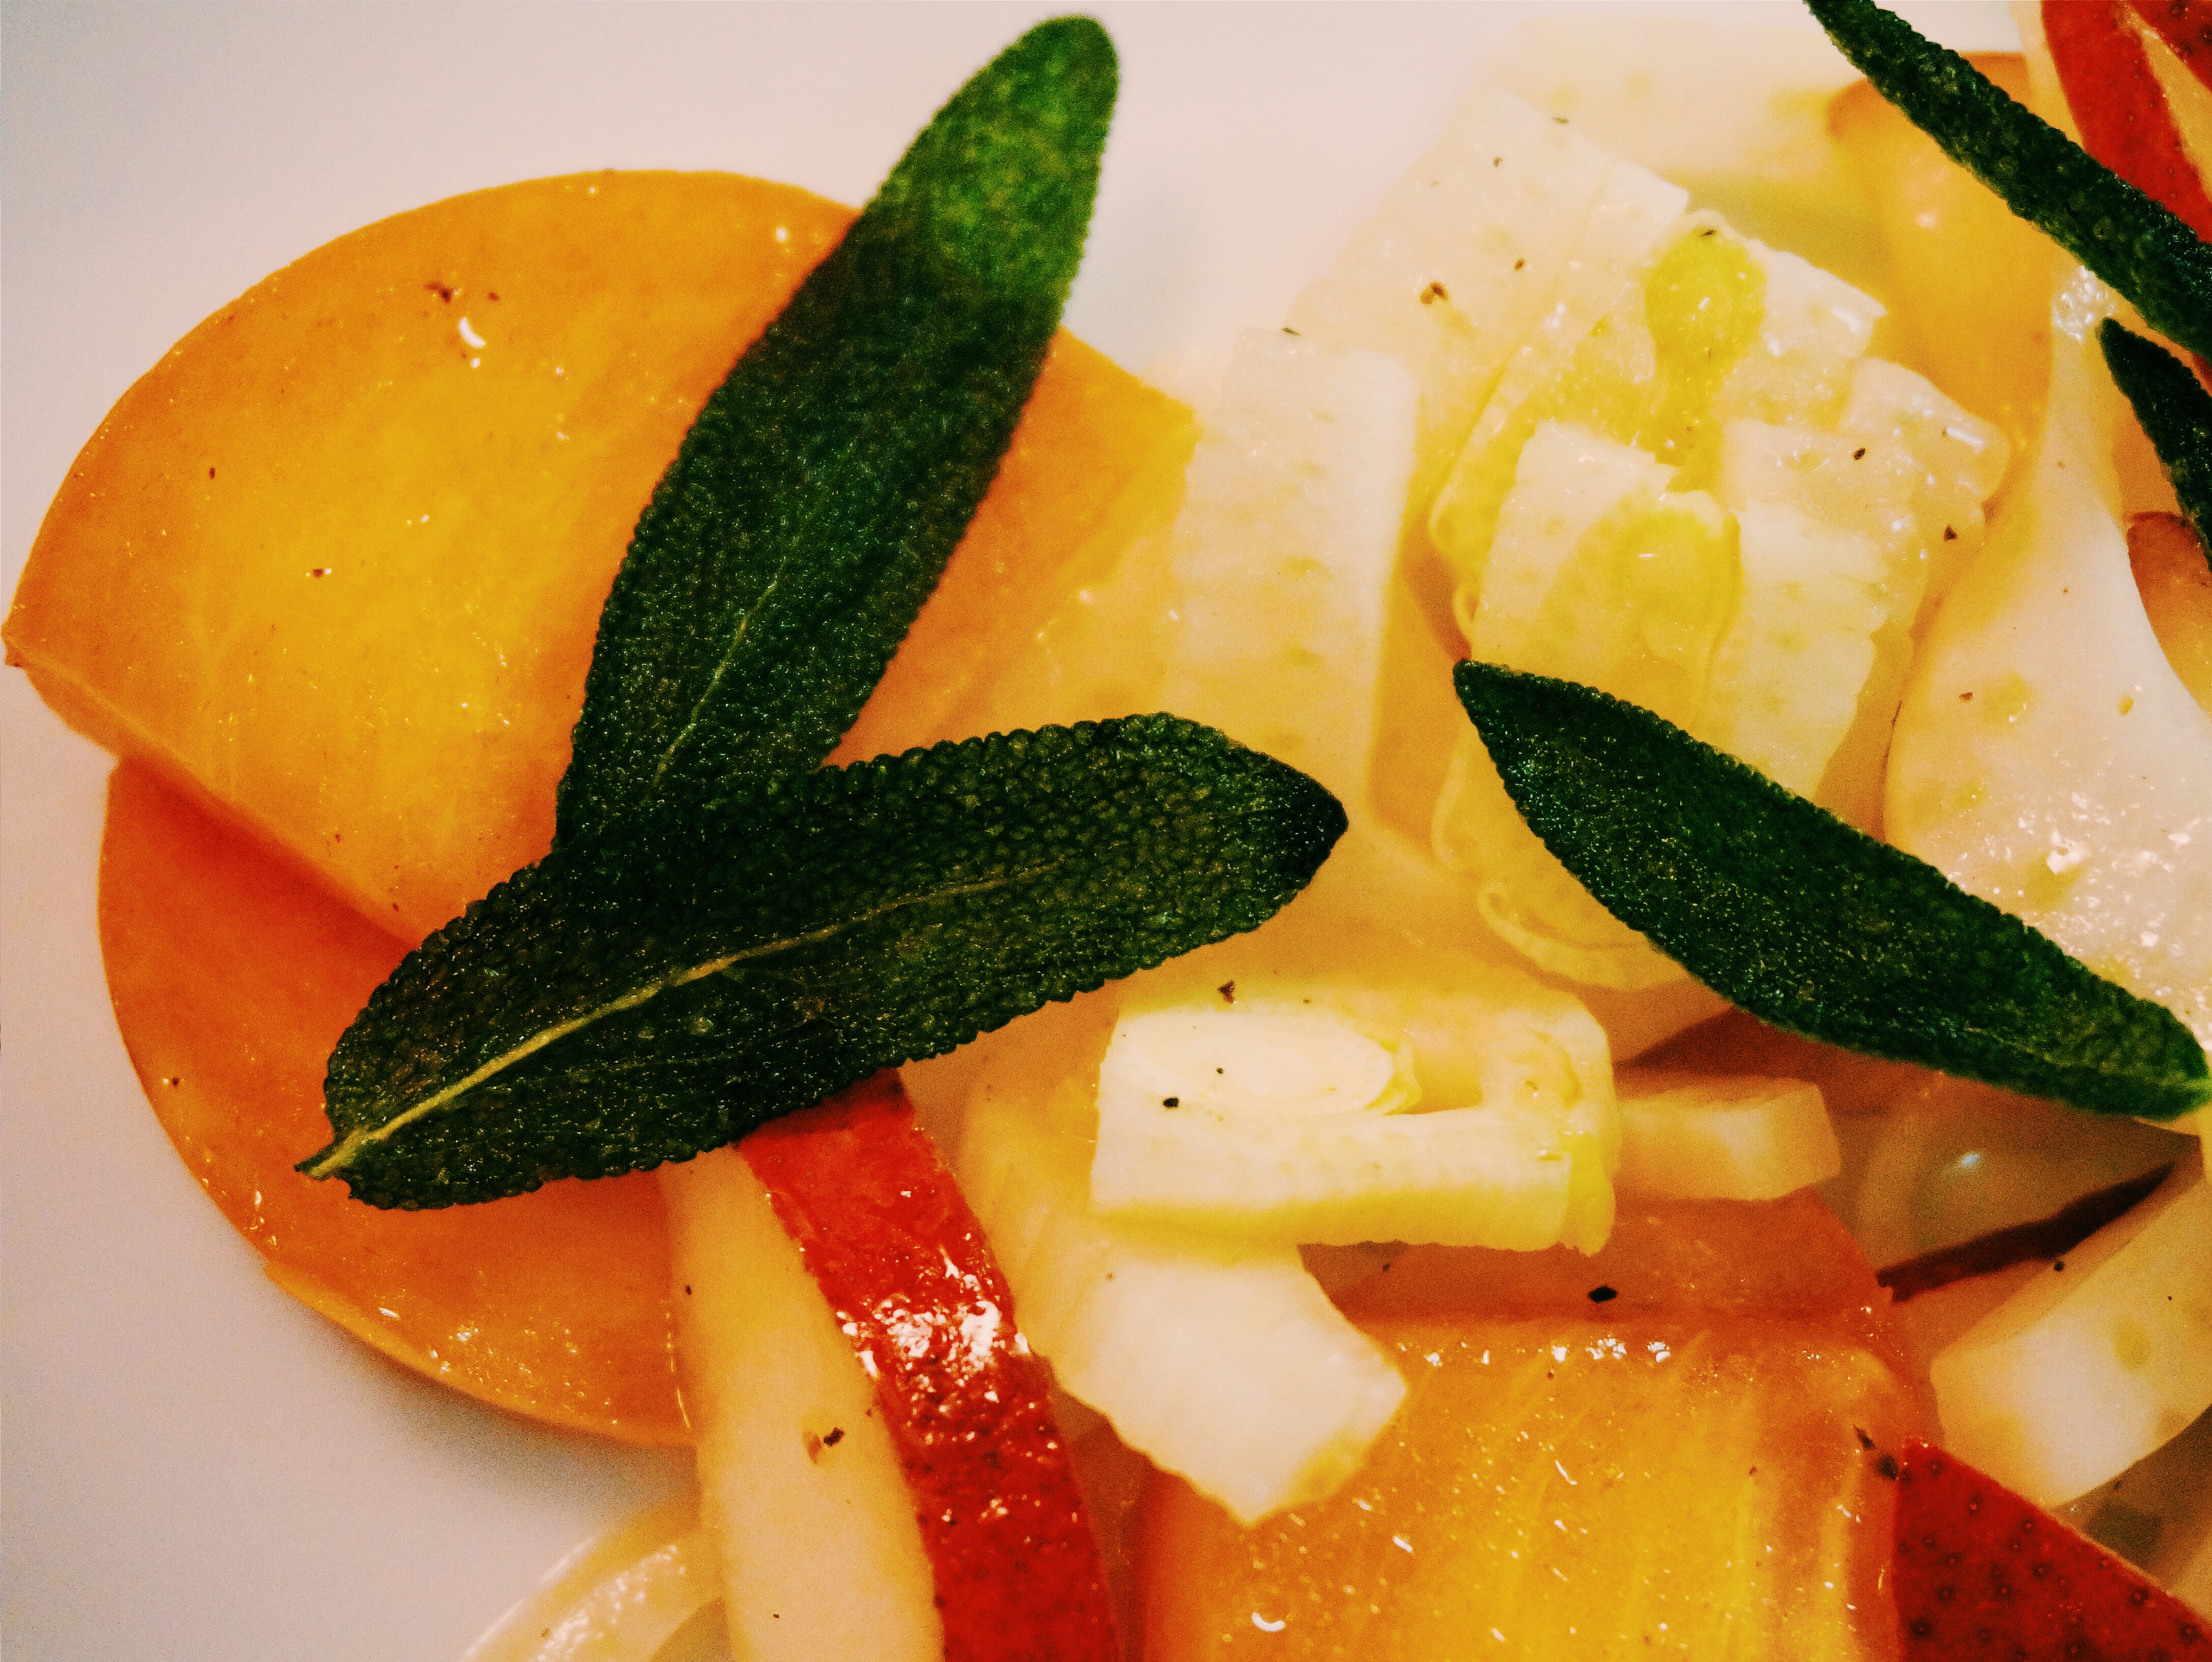 Persimmon, Pear & Fennel Salad with Fried Sage